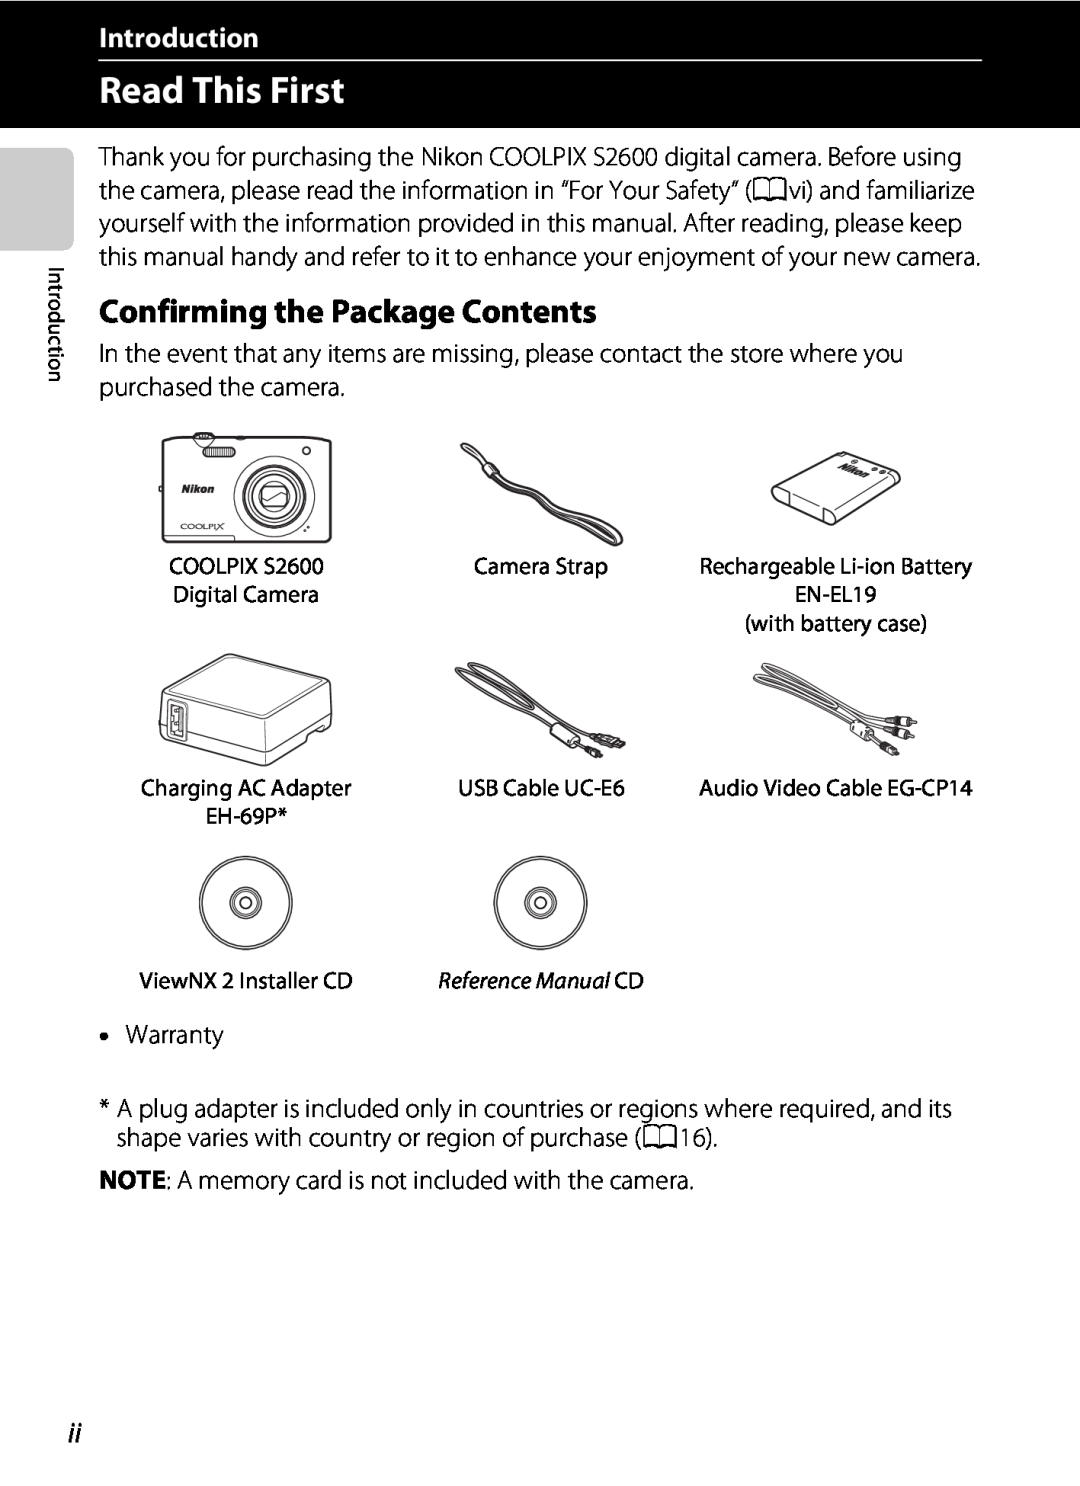 Nikon S2600 manual Read This First, Confirming the Package Contents, Introduction 